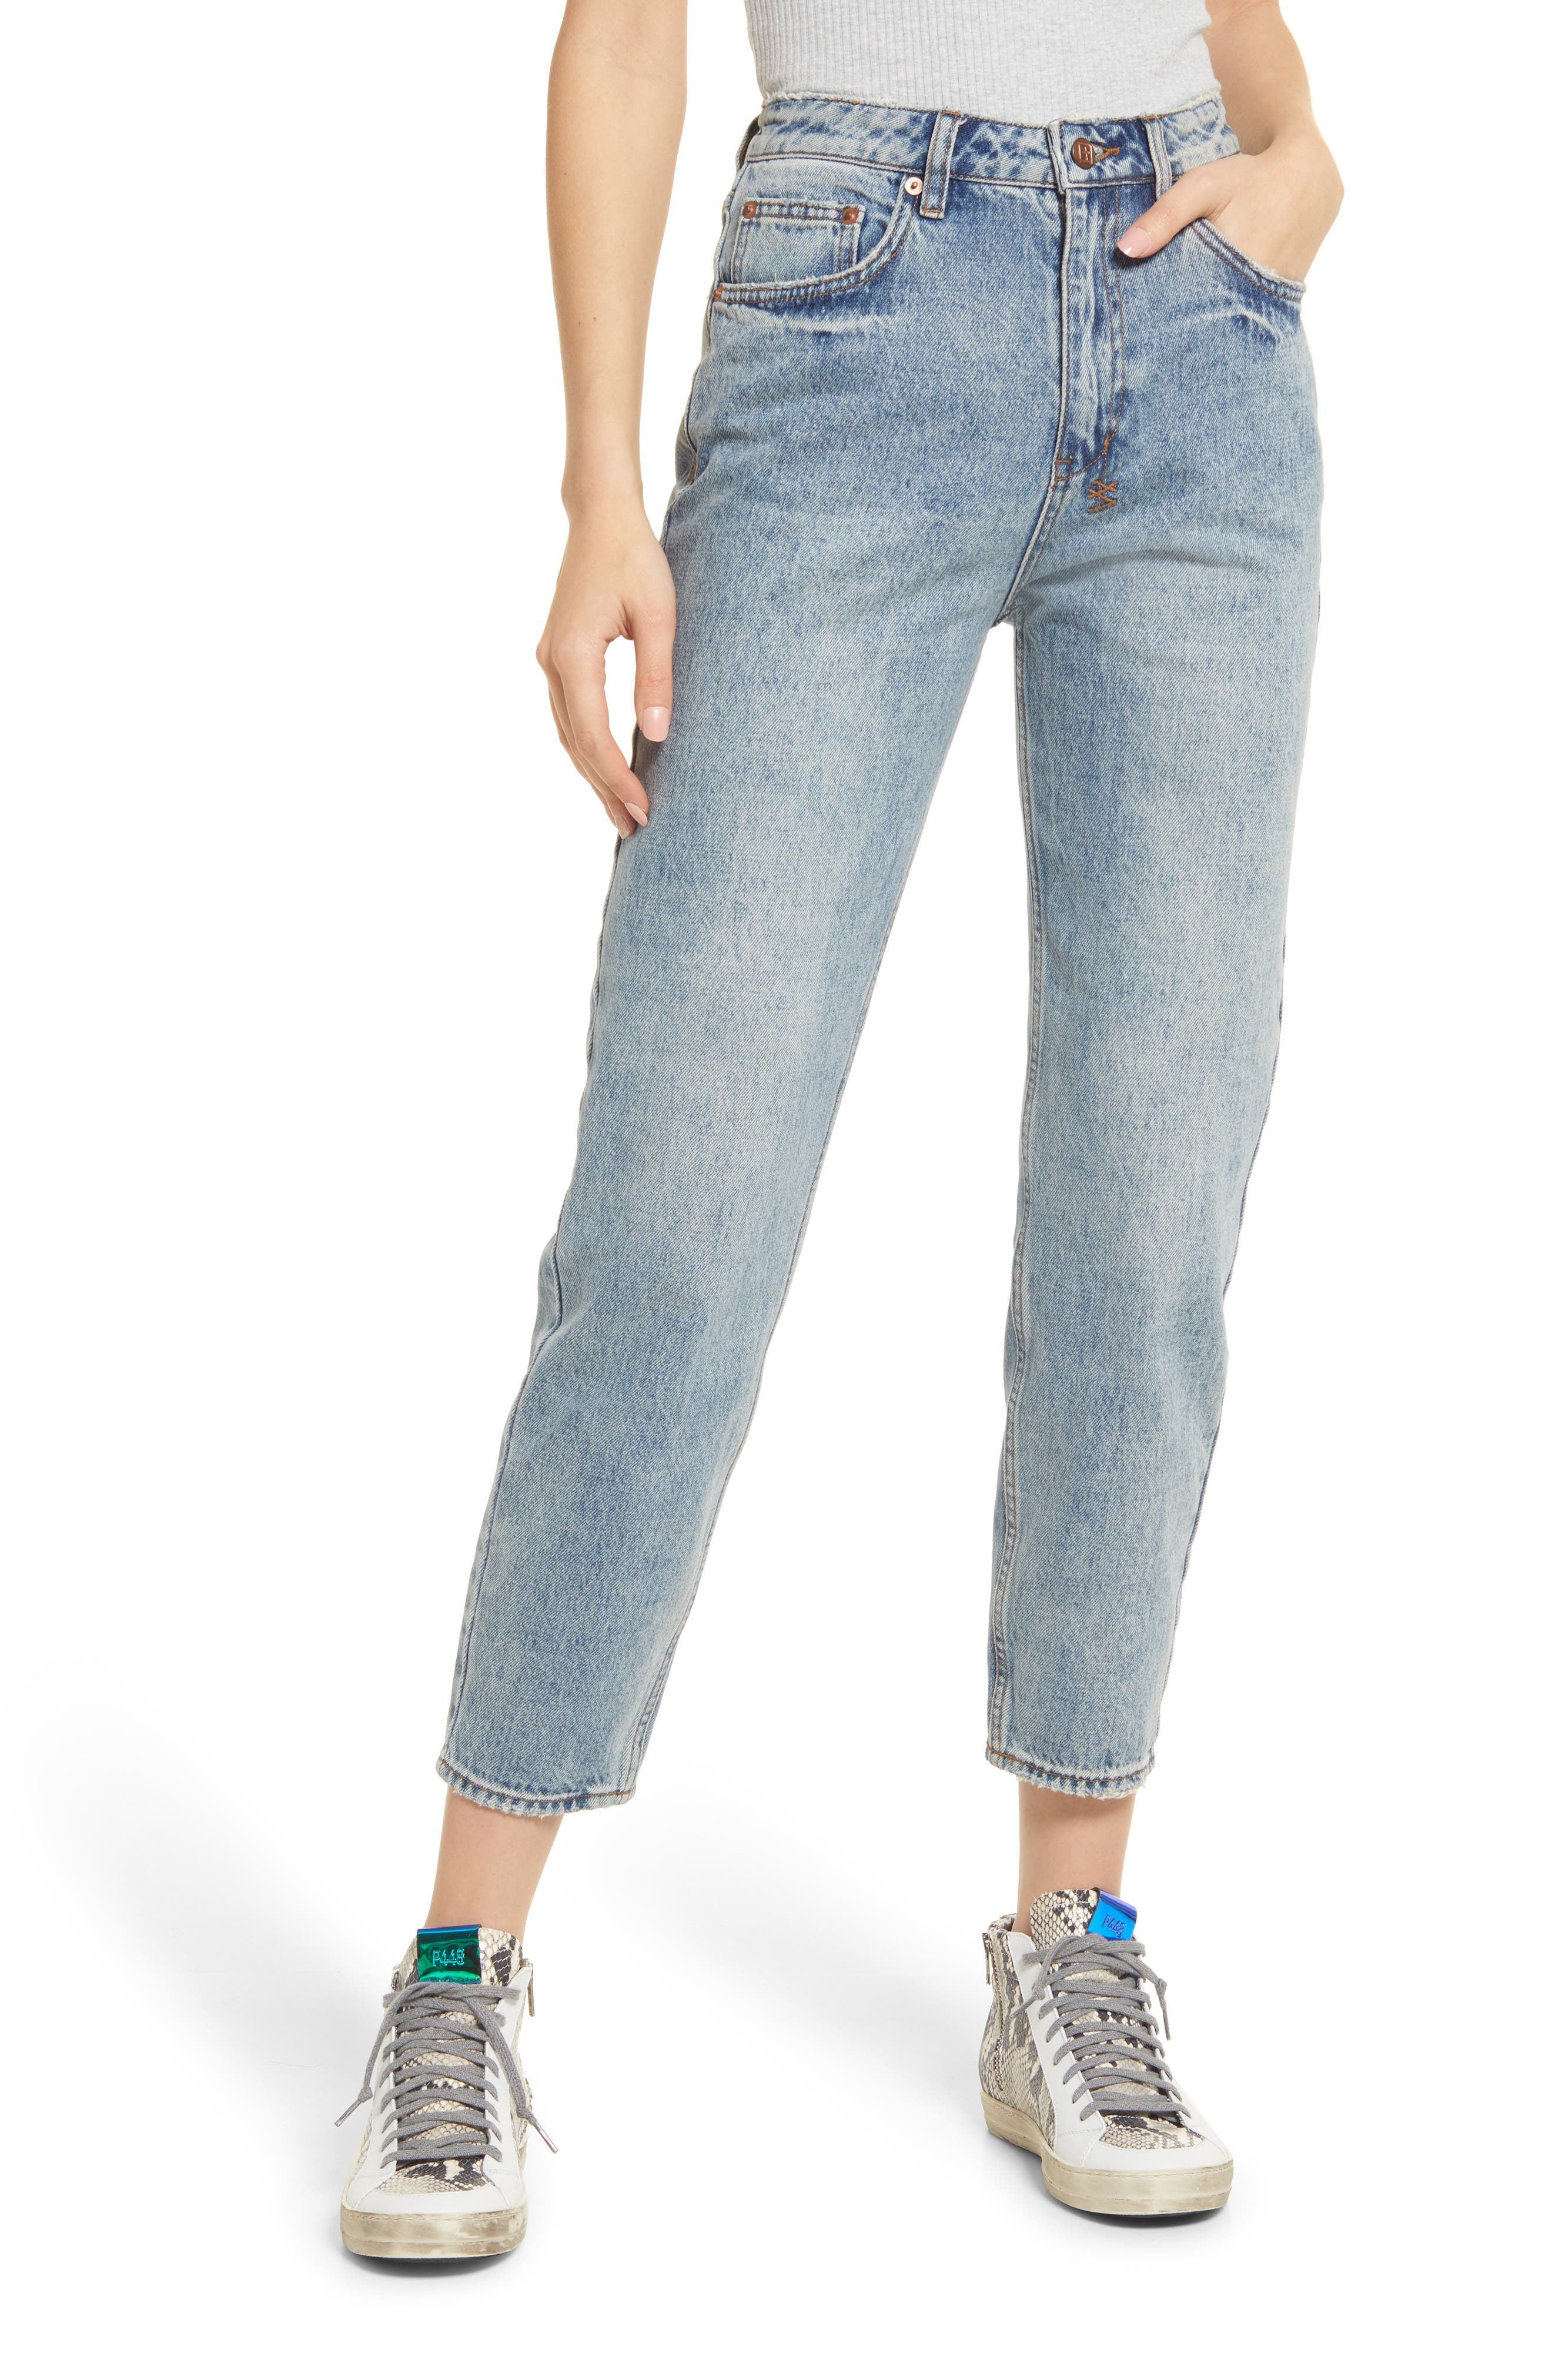 Ksubi Pointer High Waist Relaxed Tapered Jeans in Denim at Nordstrom, Size 24